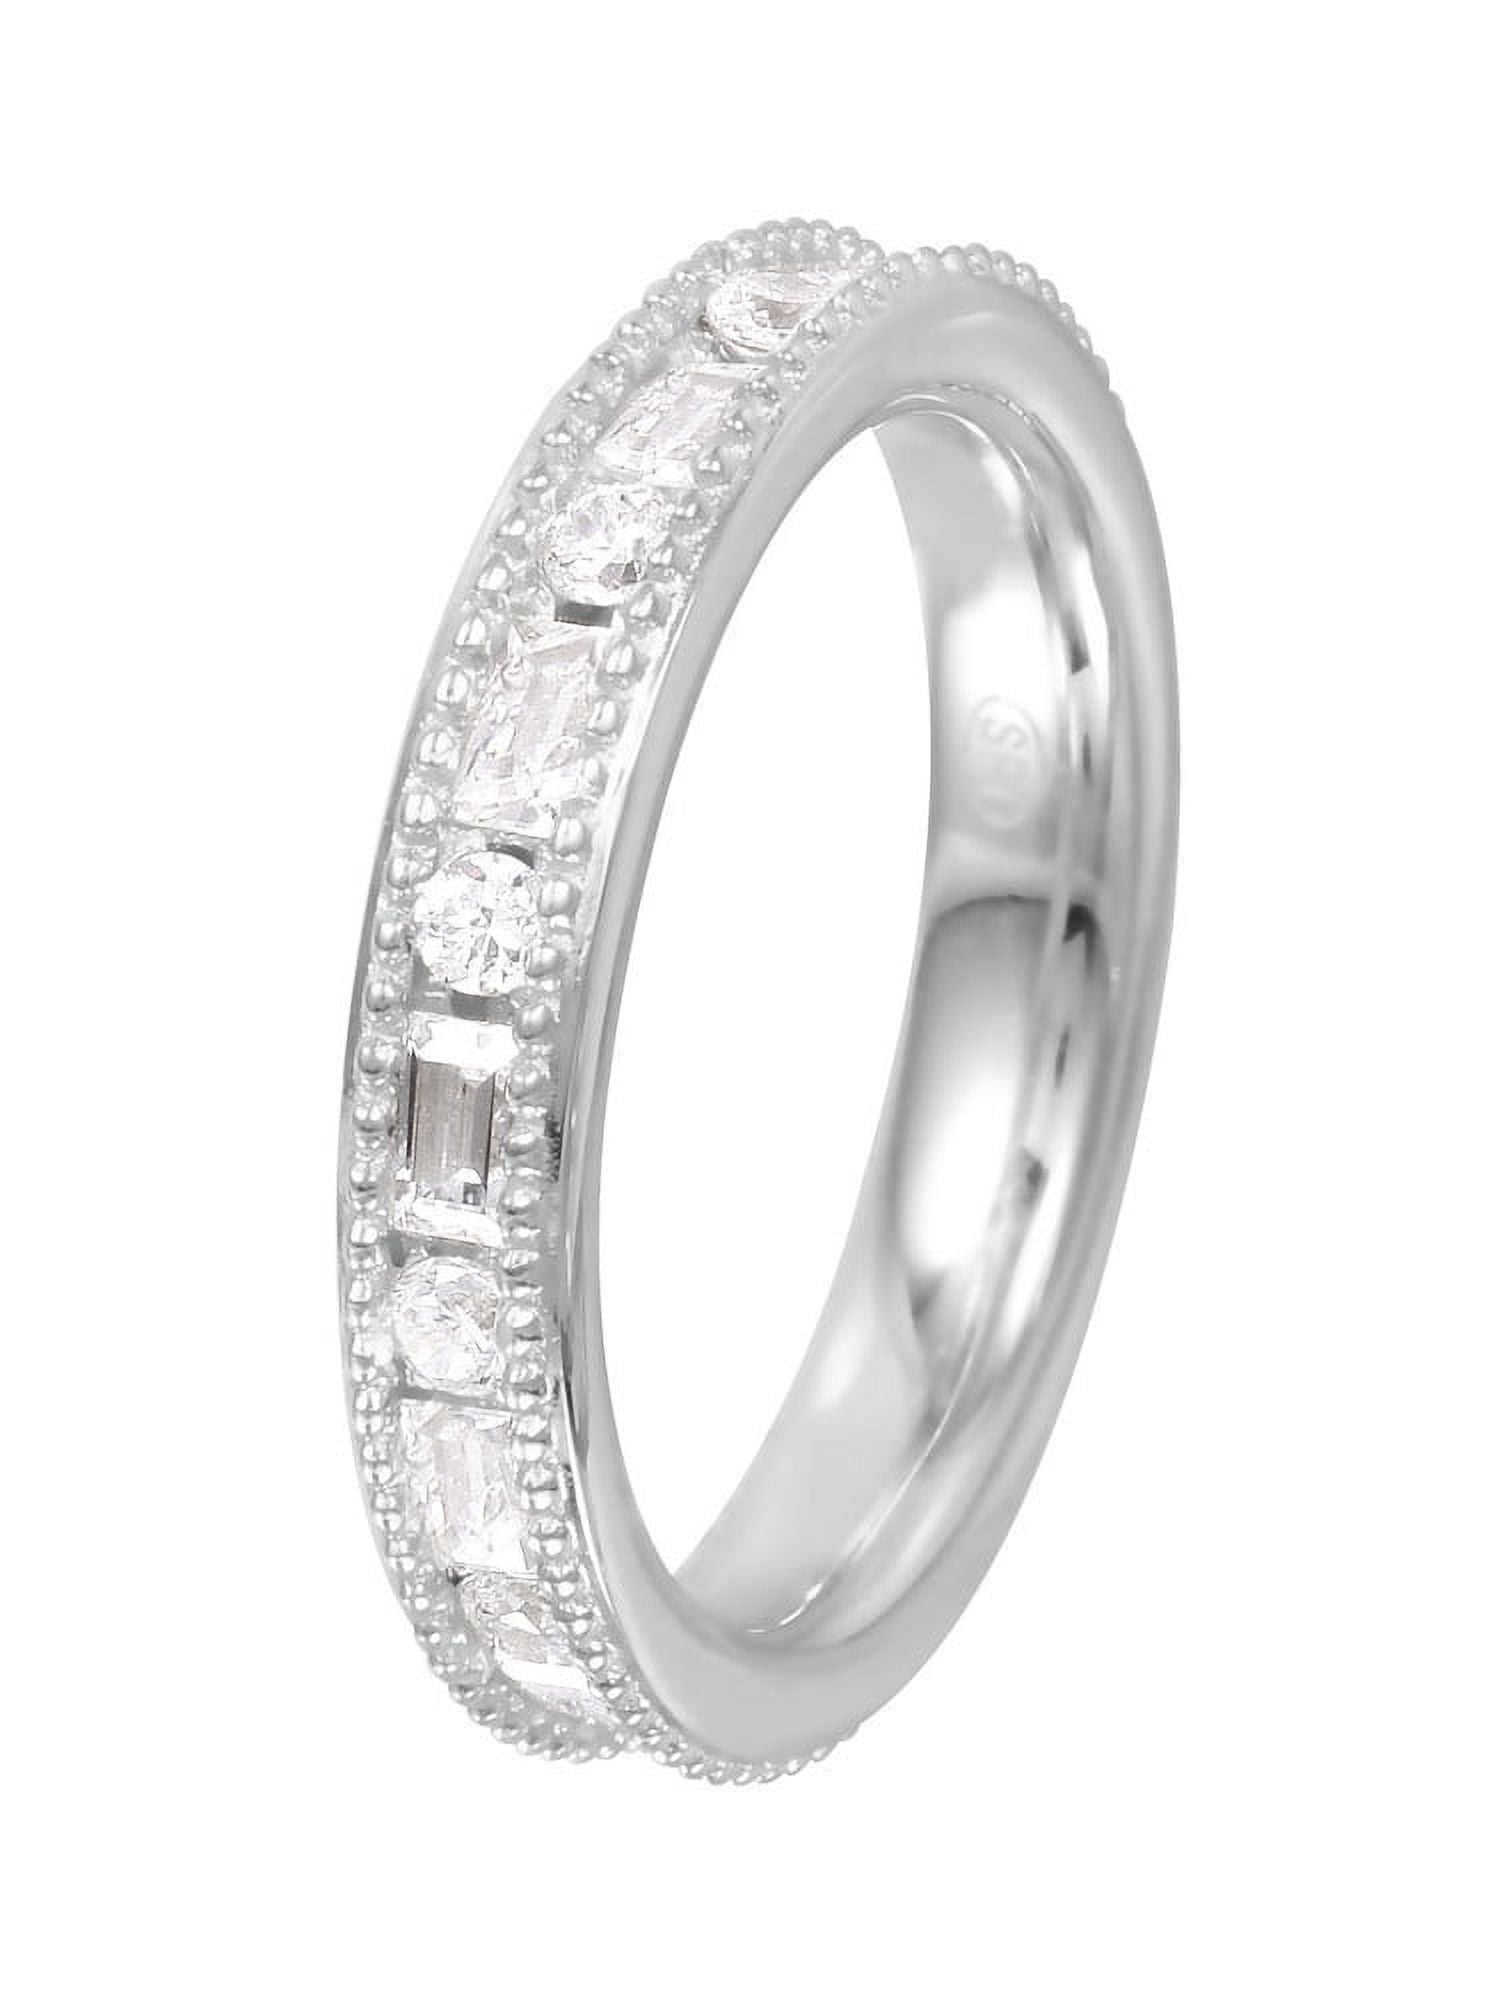 Clear Baguette Round Chanel Set Cubic Zirconia Beaded Edges Eternity Ring Sterling Silver Size 7, Women's, Grey Type